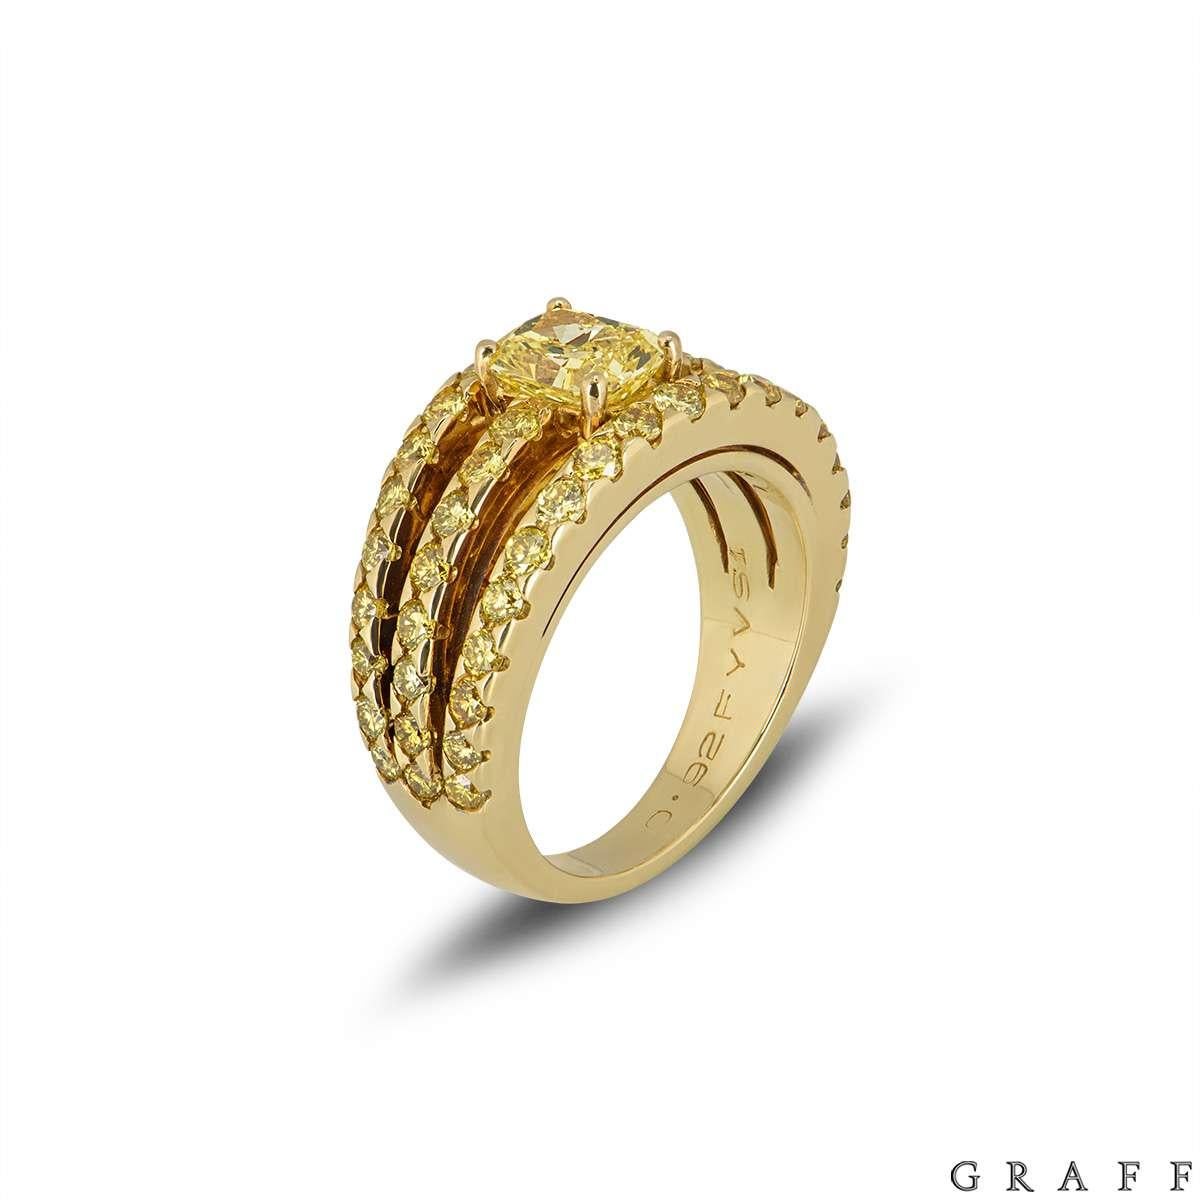 A Graff diamond ring in 18k yellow gold. The ring is set to the centre with 0.92ct rectangular modified brilliant fancy vivid yellow diamond, laser inscribed 'GRAFF'. The central diamond is claw set, positioned in the middle of three bands set with